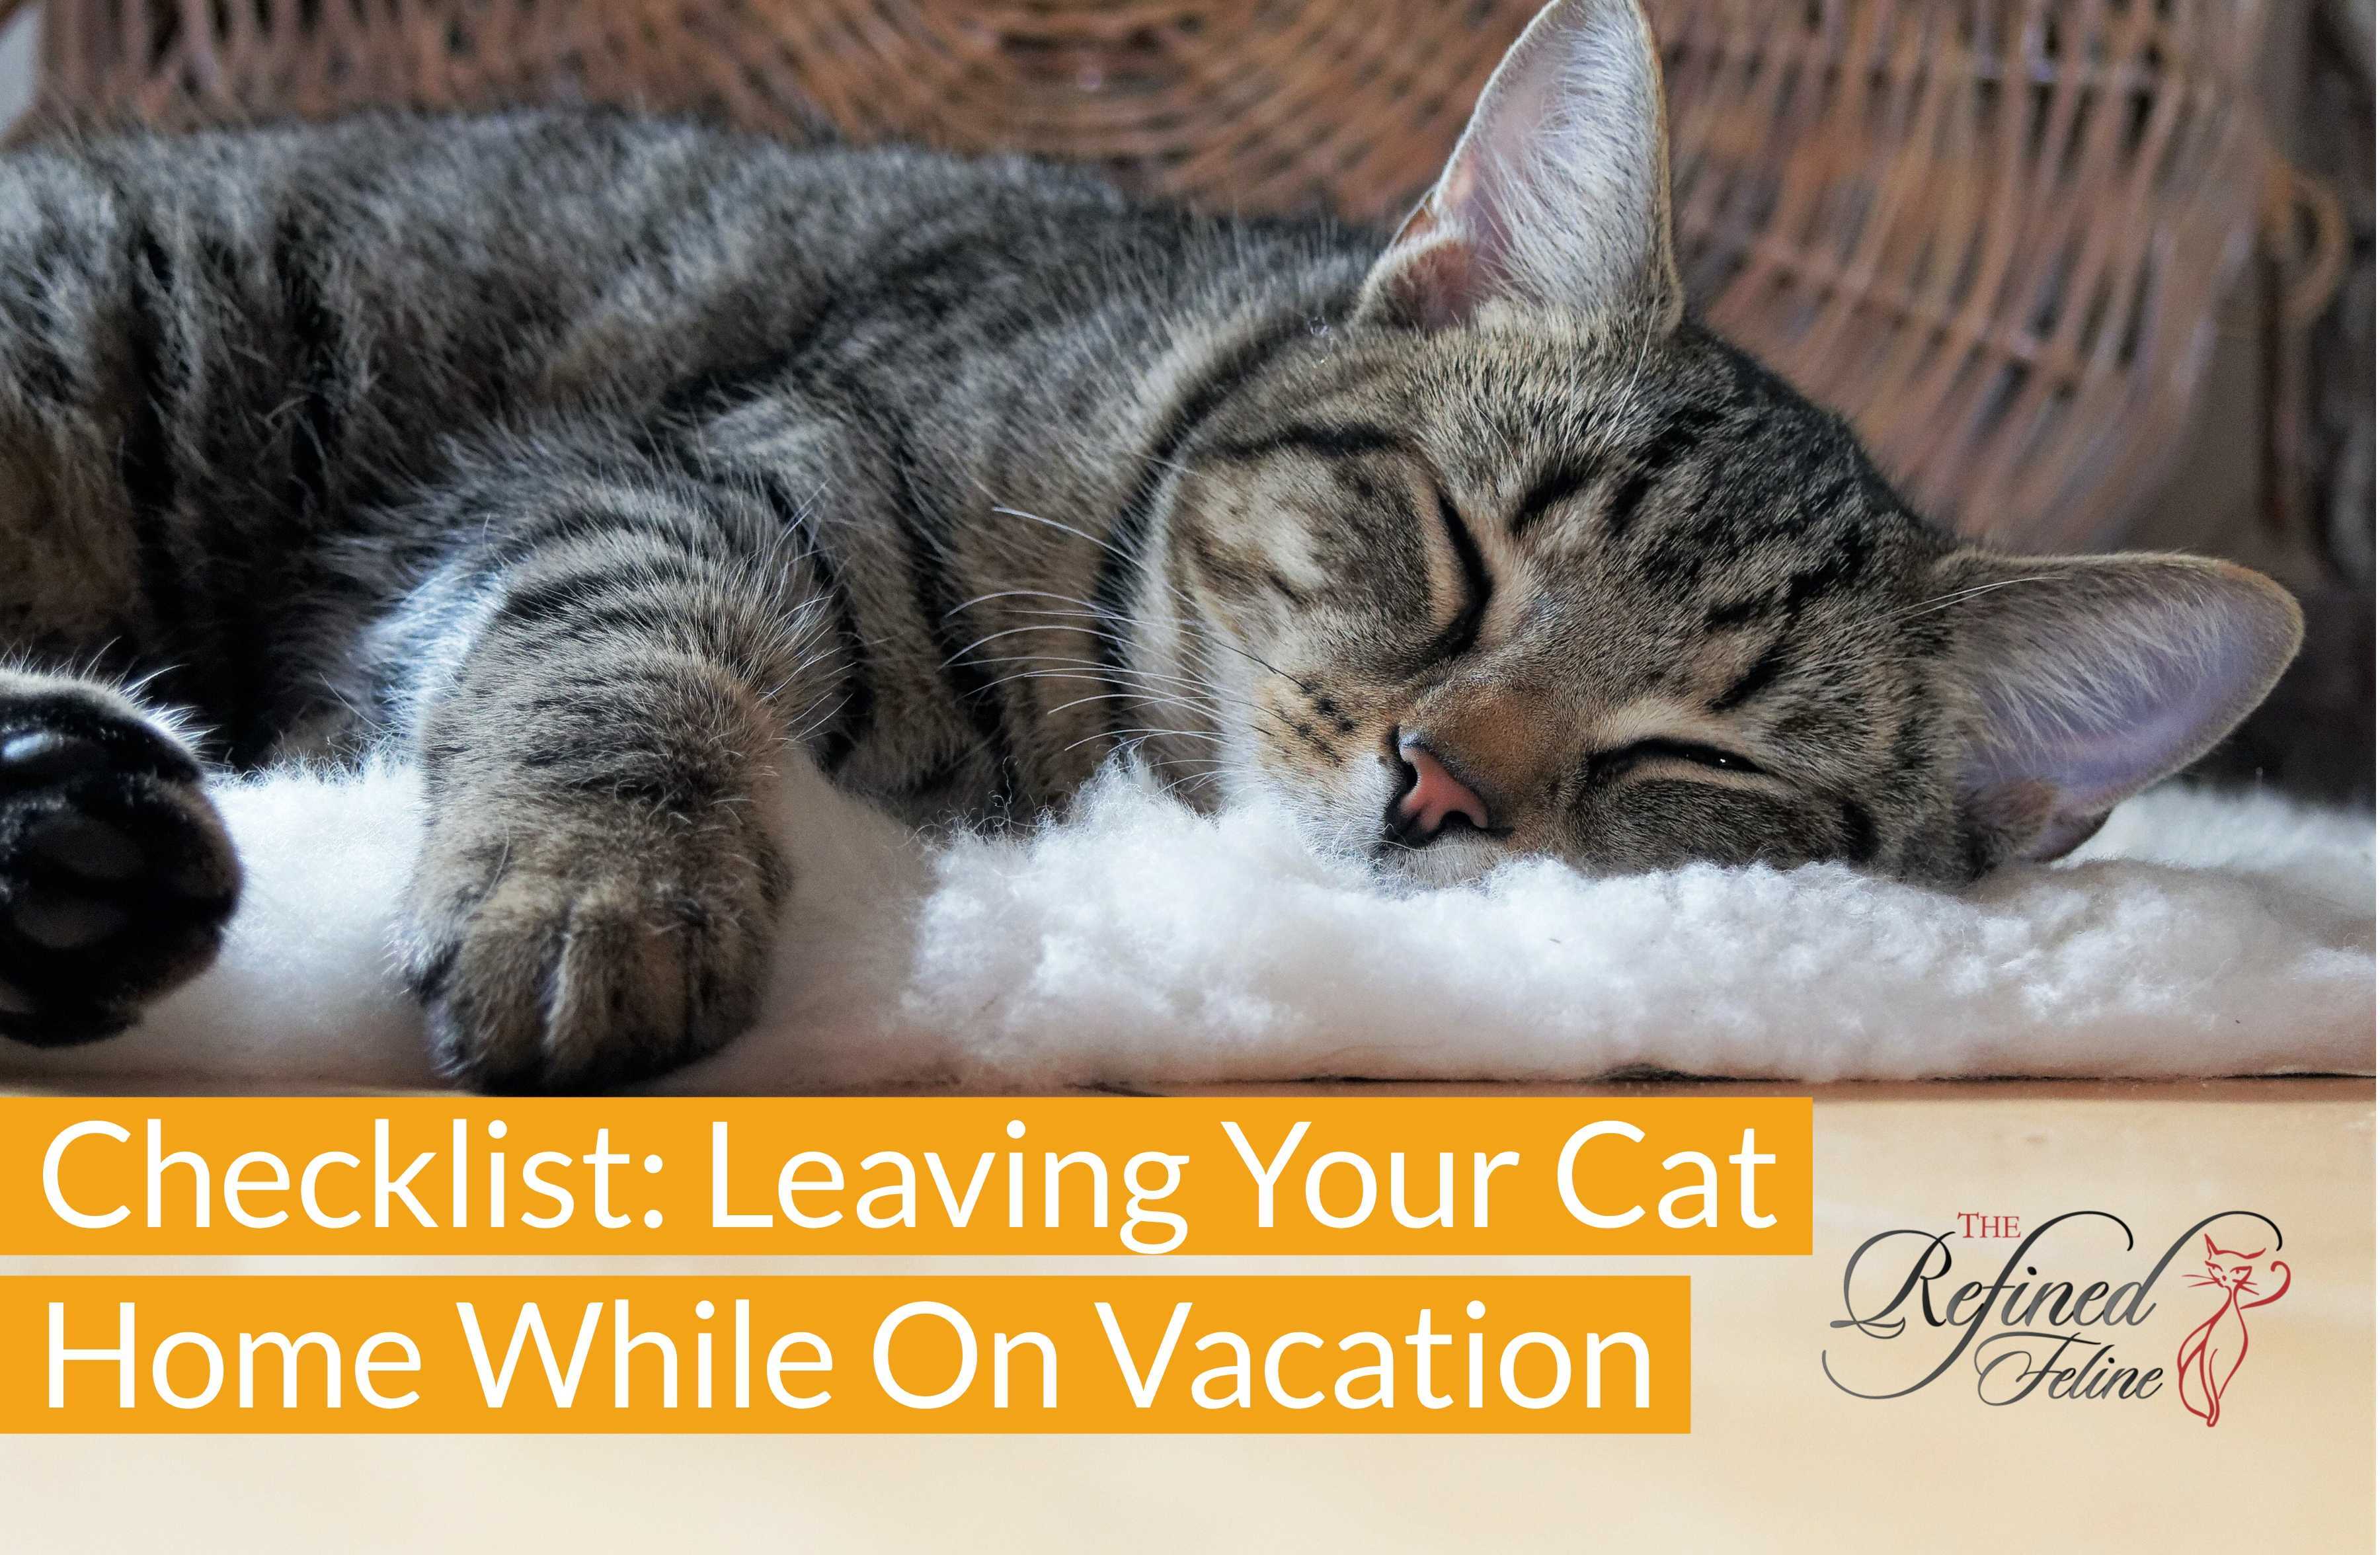 Checklist For Leaving Your Cat Home While On Vacation - The Refined Feline